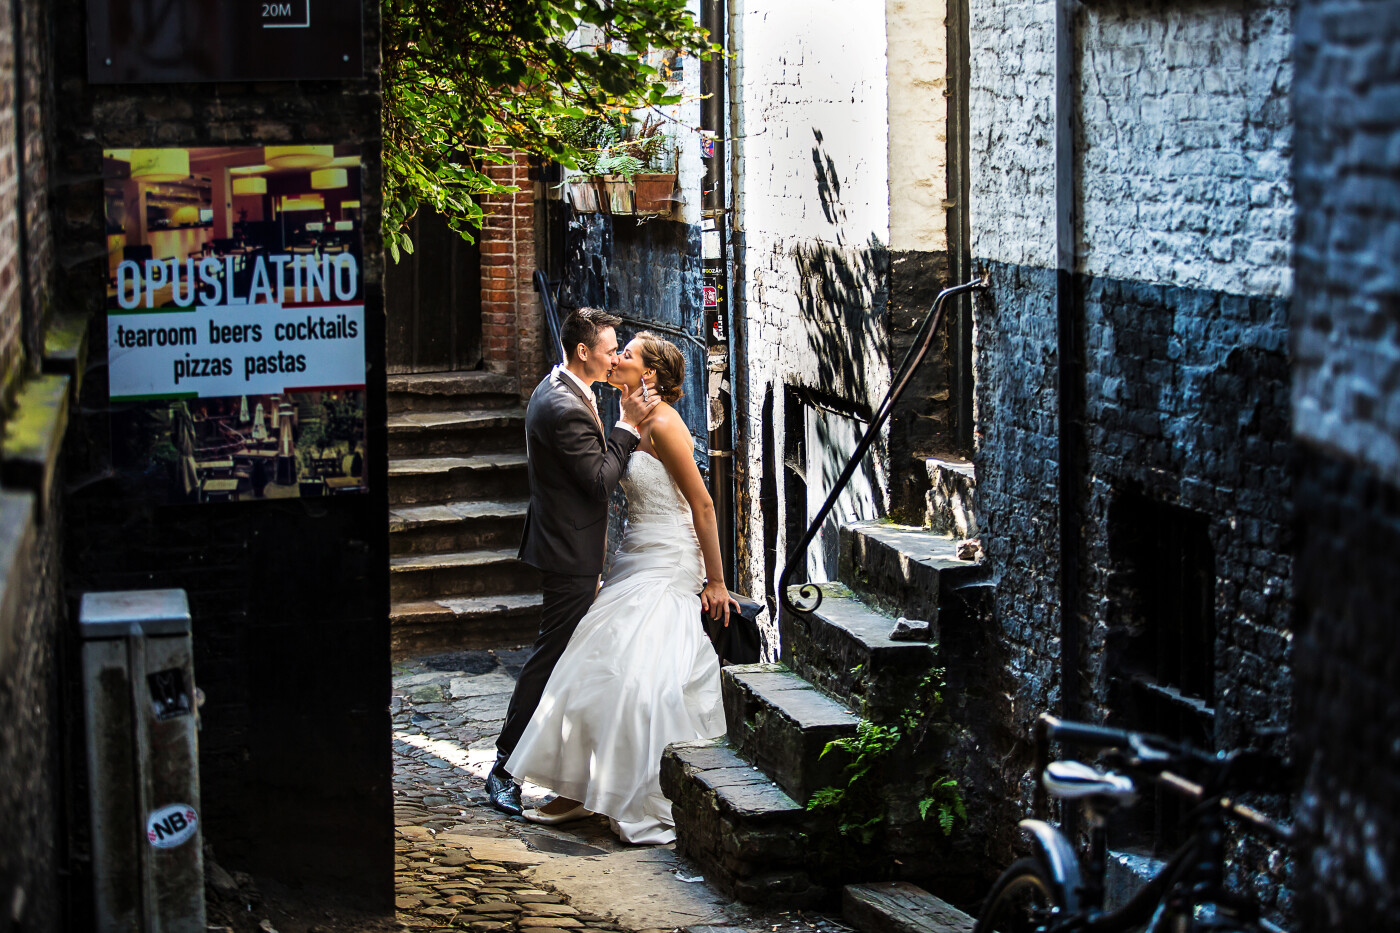 August 27th, 2016, Bruges. It was an extremely hot day in Belgium! The photoshoot of this young couple was in the center of Bruges. In the historical center, you can discover innumerable amazing places after every corner, a true gift for a wedding photographer. <br />
This shot was taken in a very small alley, in front of an medieval little factory, nowadays a cosy tavern.<br />
Despite the bright light on this very sunny day, the light in the alley was subtle and gave the picture an intimate atmosphere.